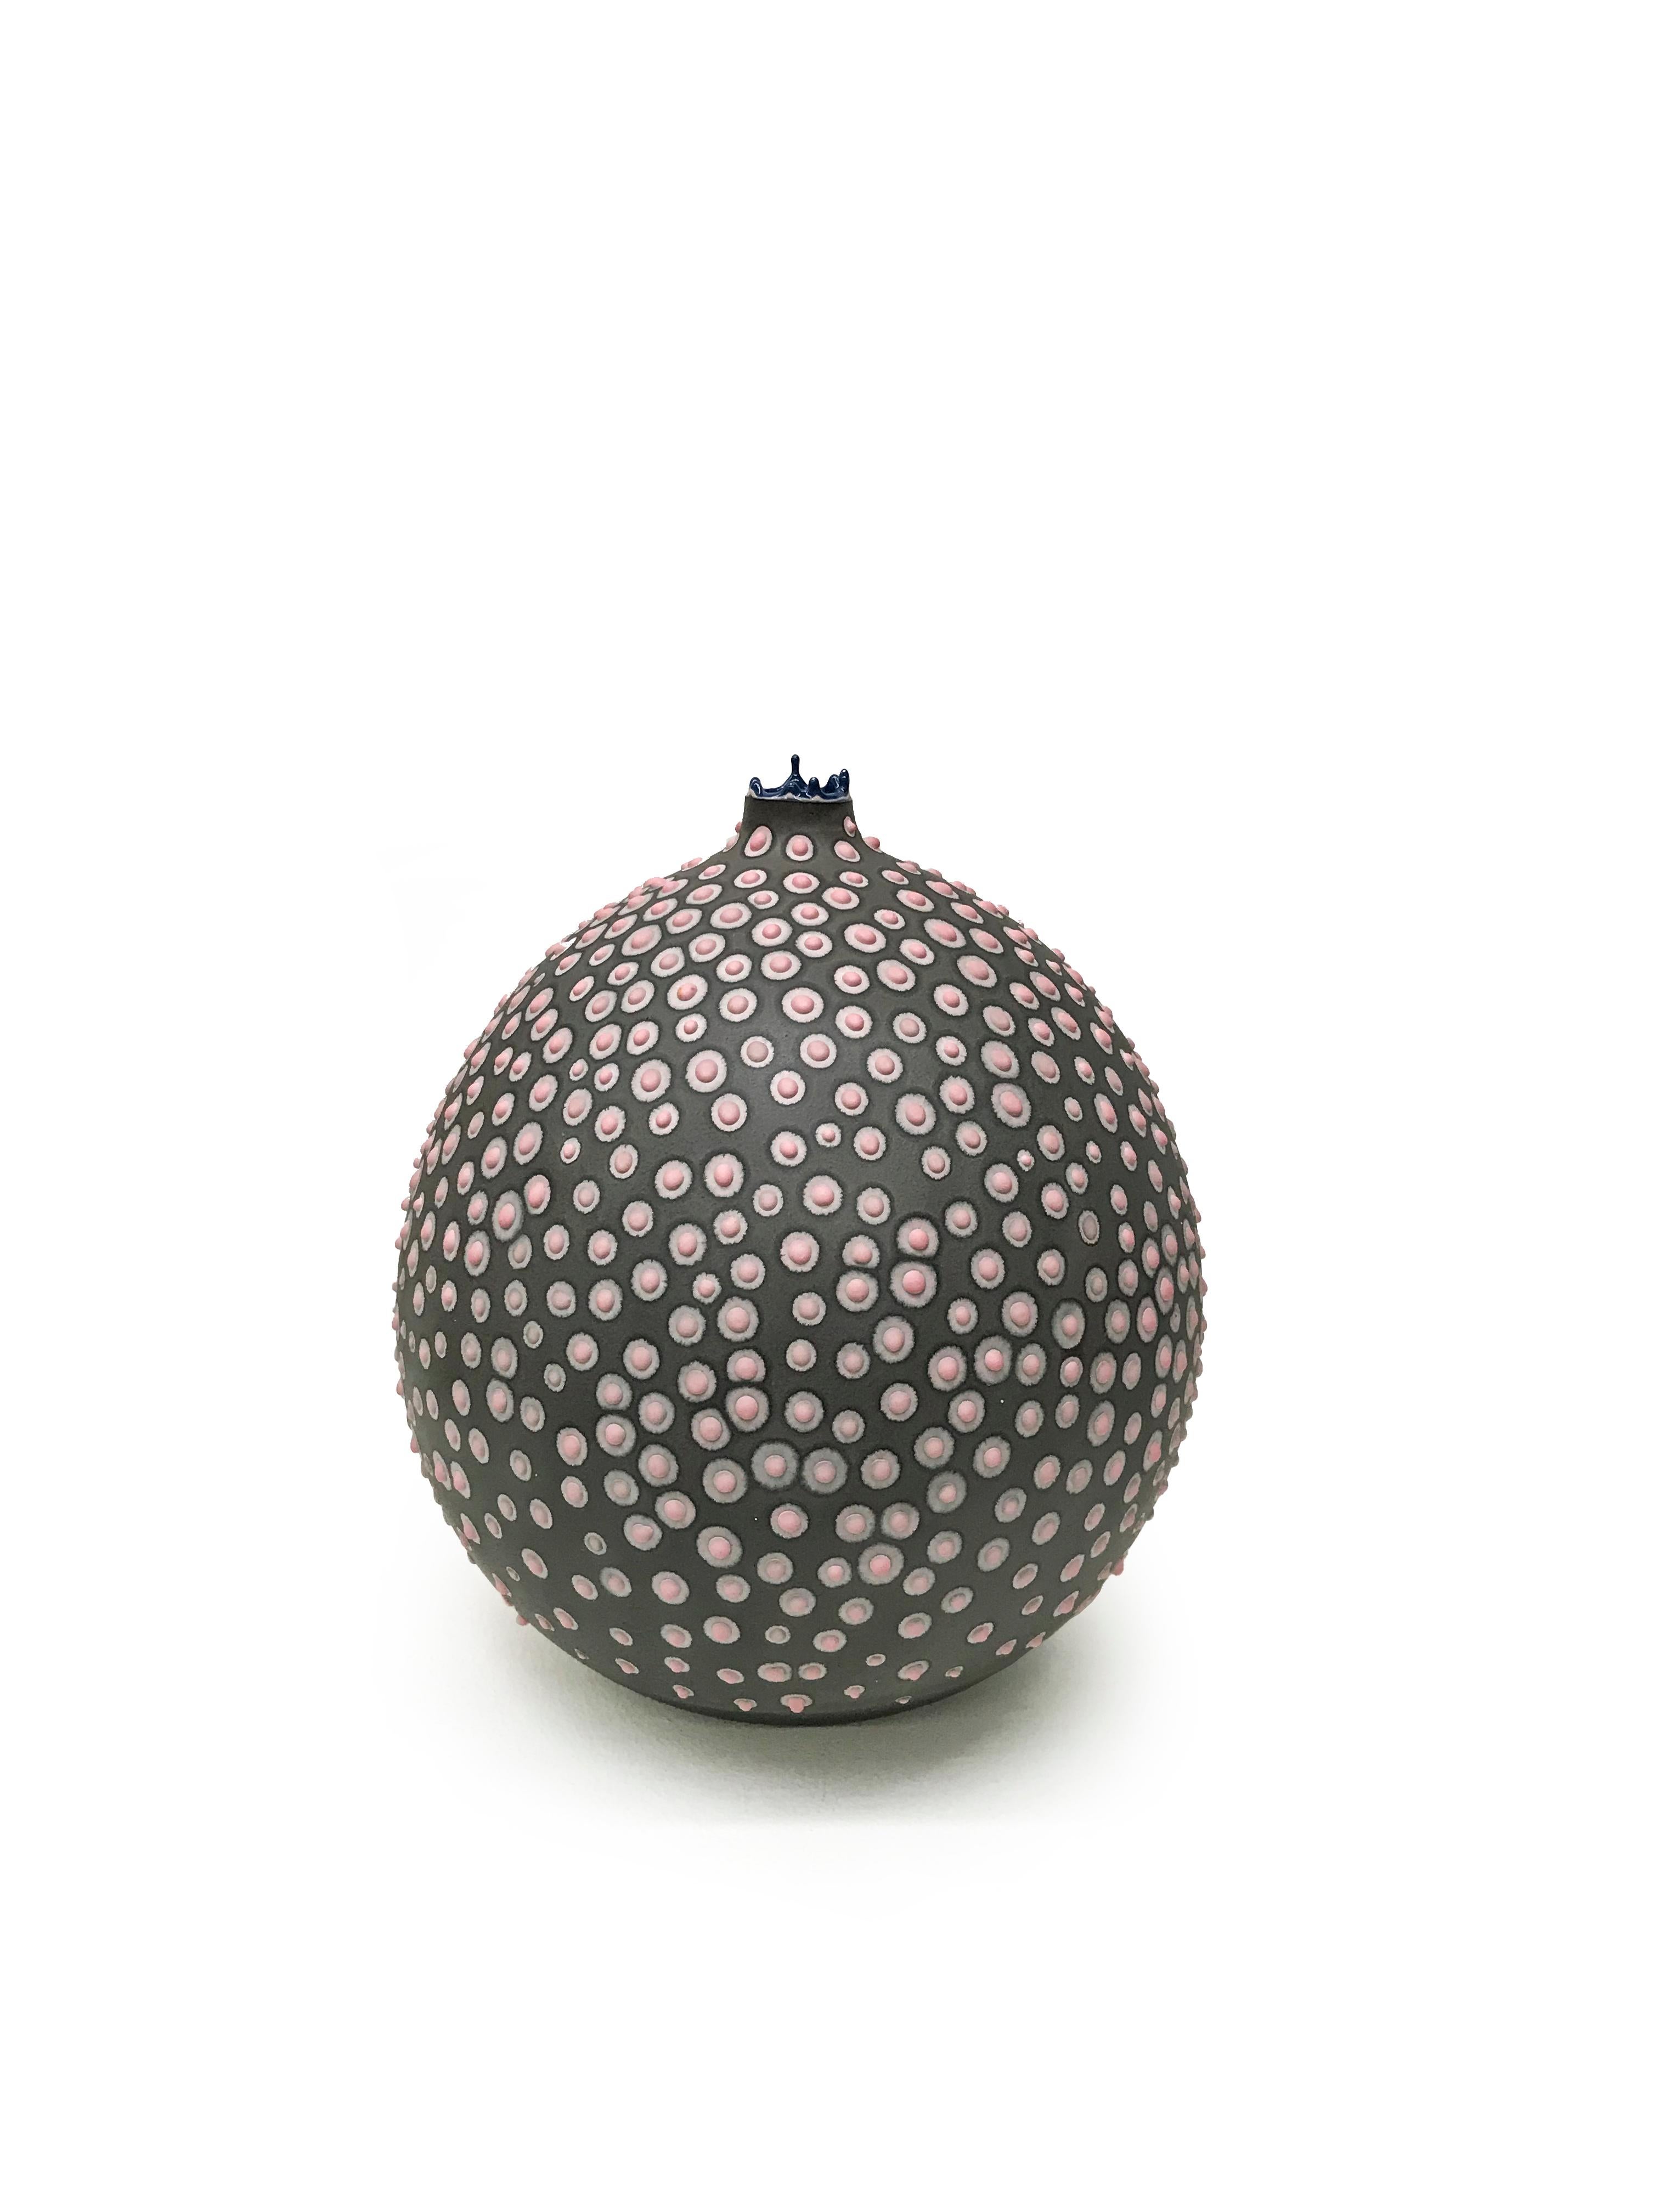 Granite Hesse Pasteur vase by Elyse Graham
Dimensions: W 20 x D 20 x H 23 cm
Materials: plaster, resin
Molded, dyed, and finished by hand in LA. customization
Available.
All pieces are made to order.

Our Microbe Collection is inspired by the